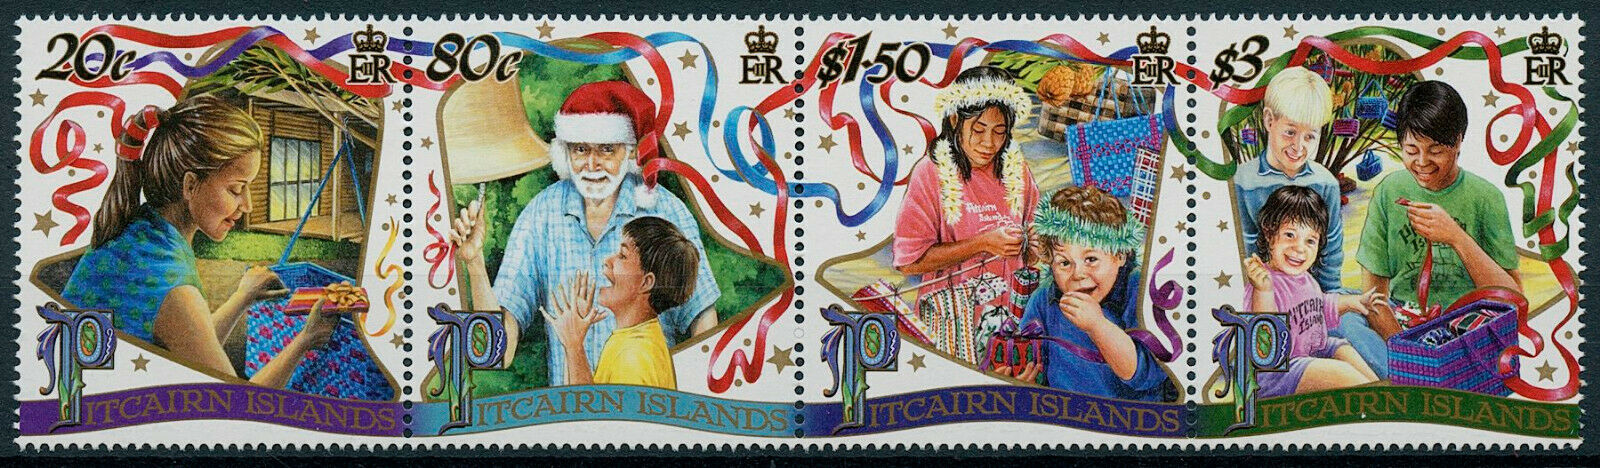 Pitcairn Islands 2000 MNH Christmas Stamps Decorations Presents 4v Strip